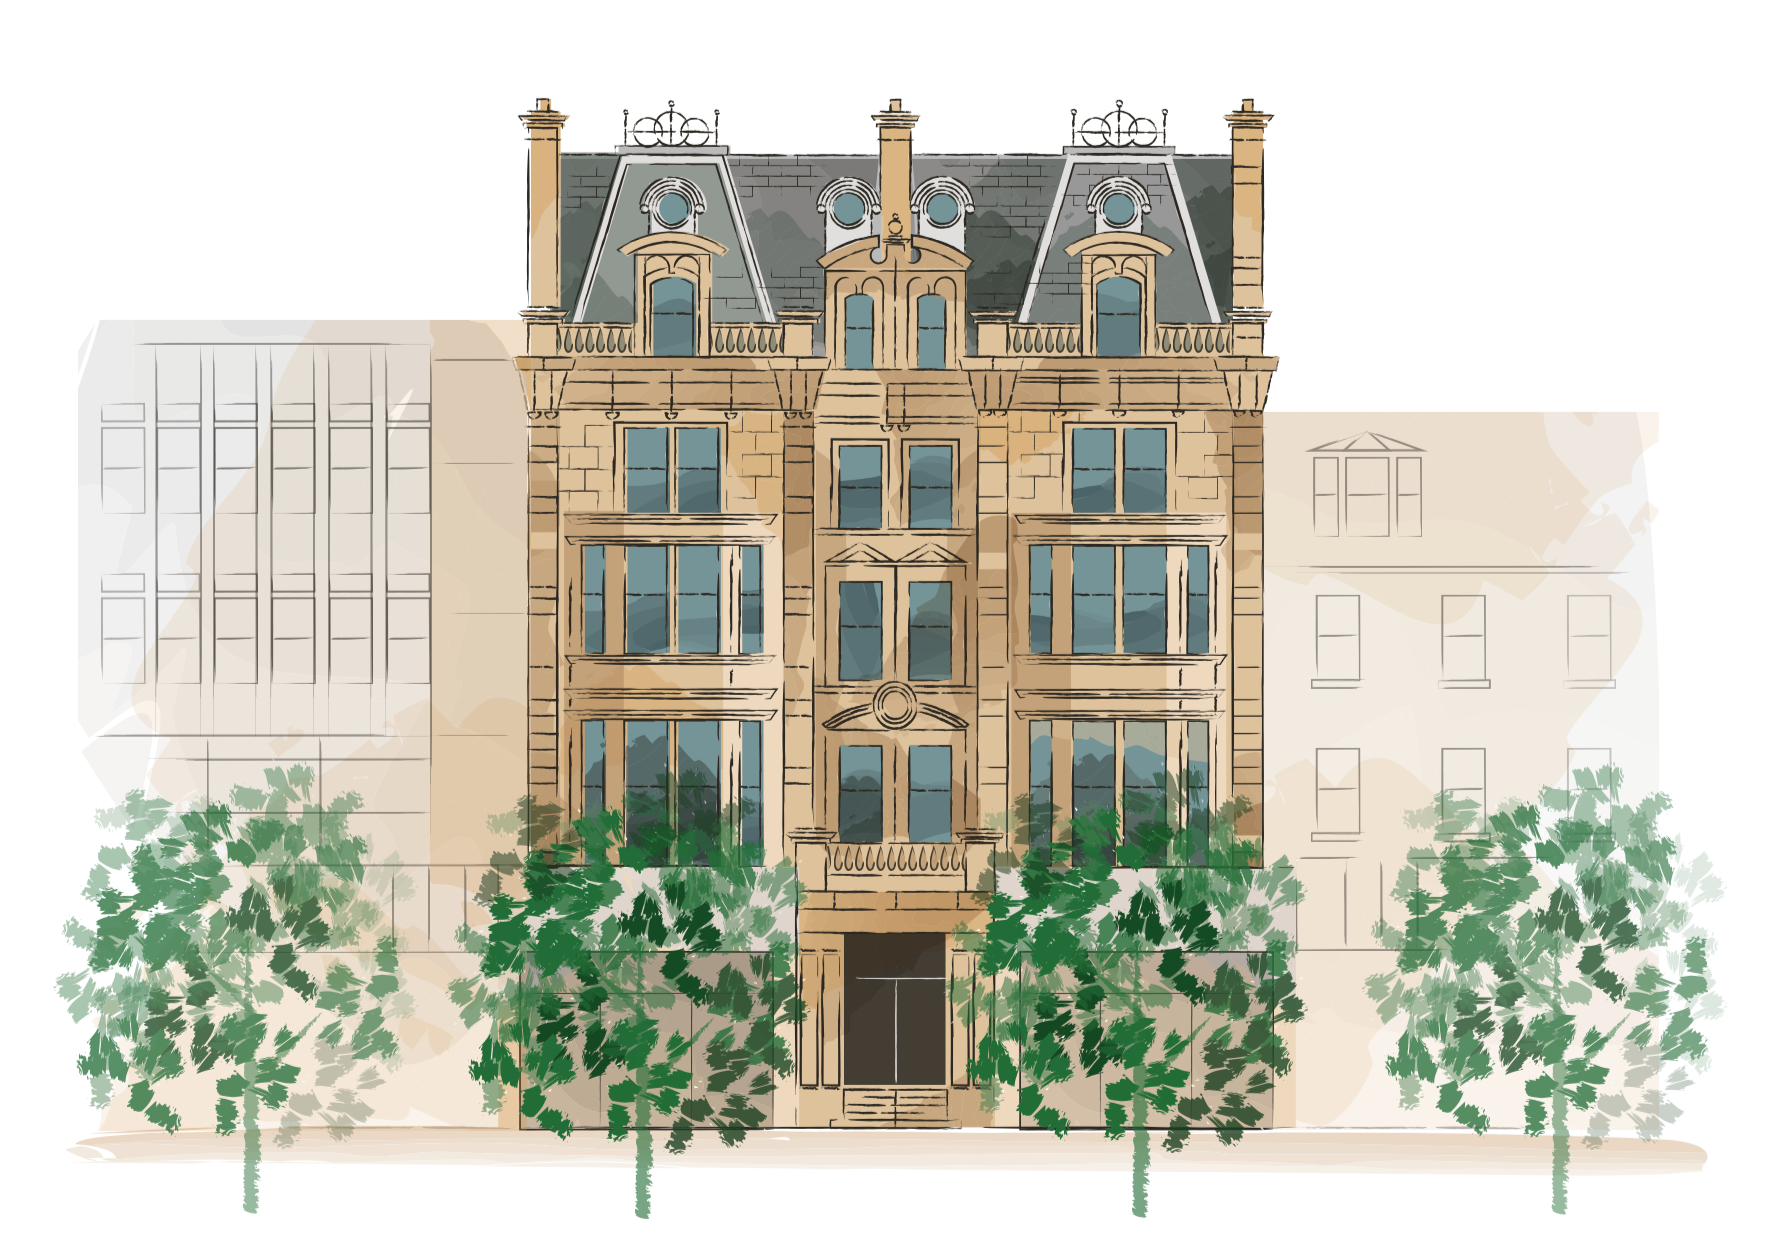 An artist’s impression of the facade of 100 Princes Street